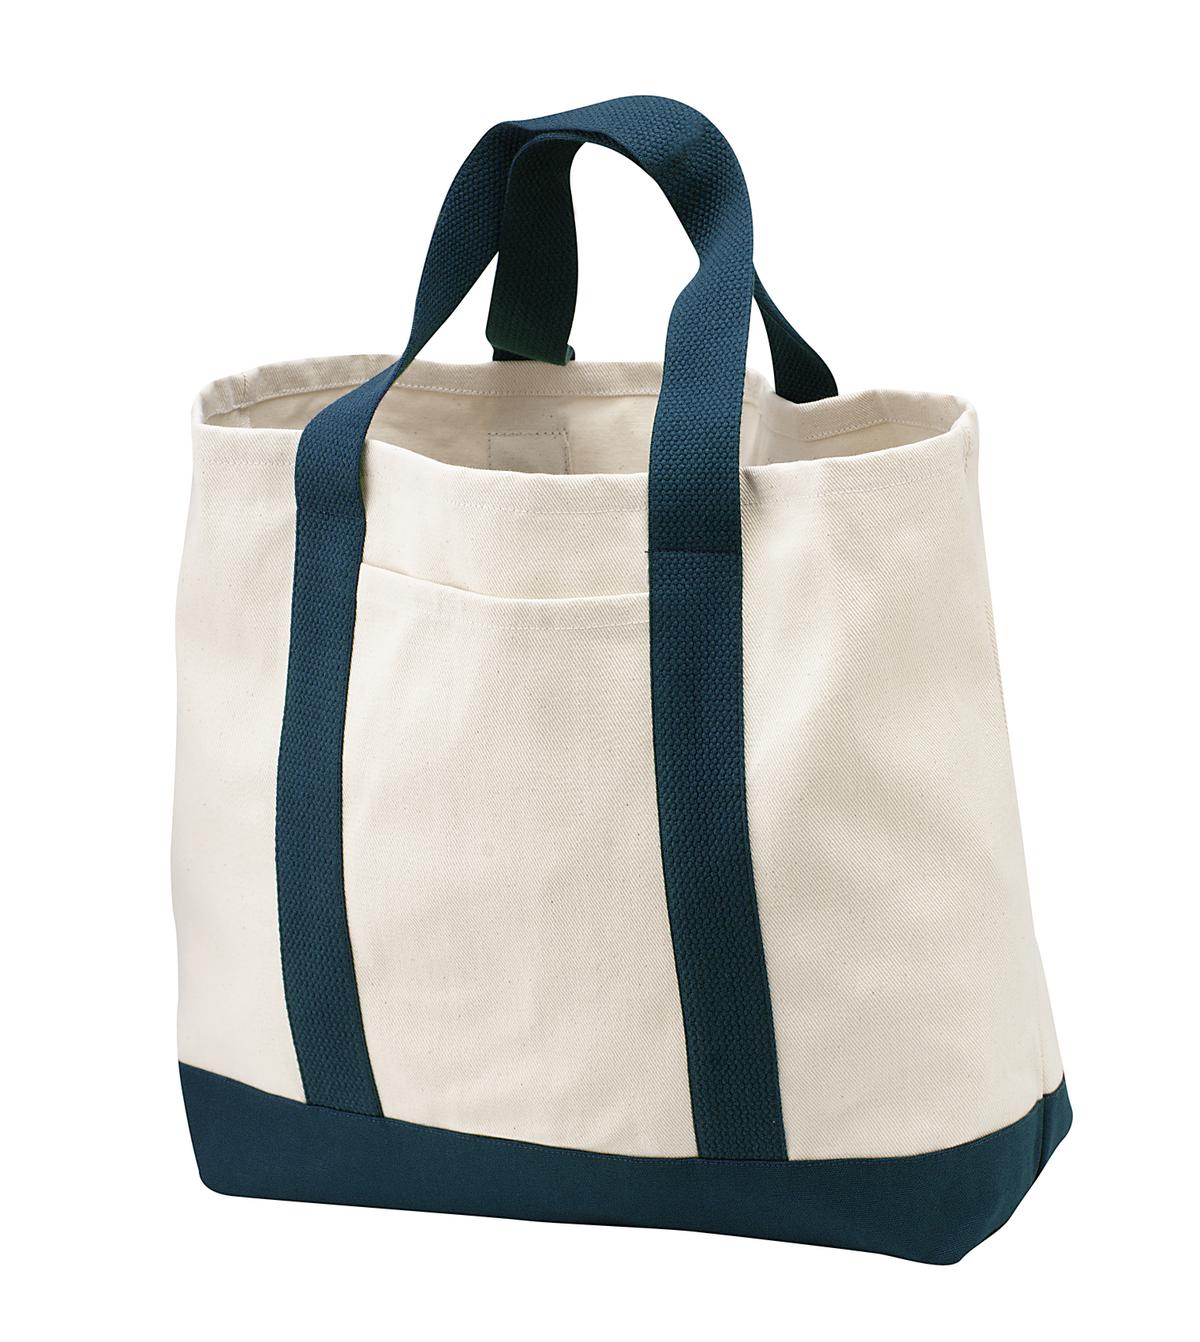 Port Authority® - Ideal Twill Two-Tone Shopping Tote. B400 - DFW Impression